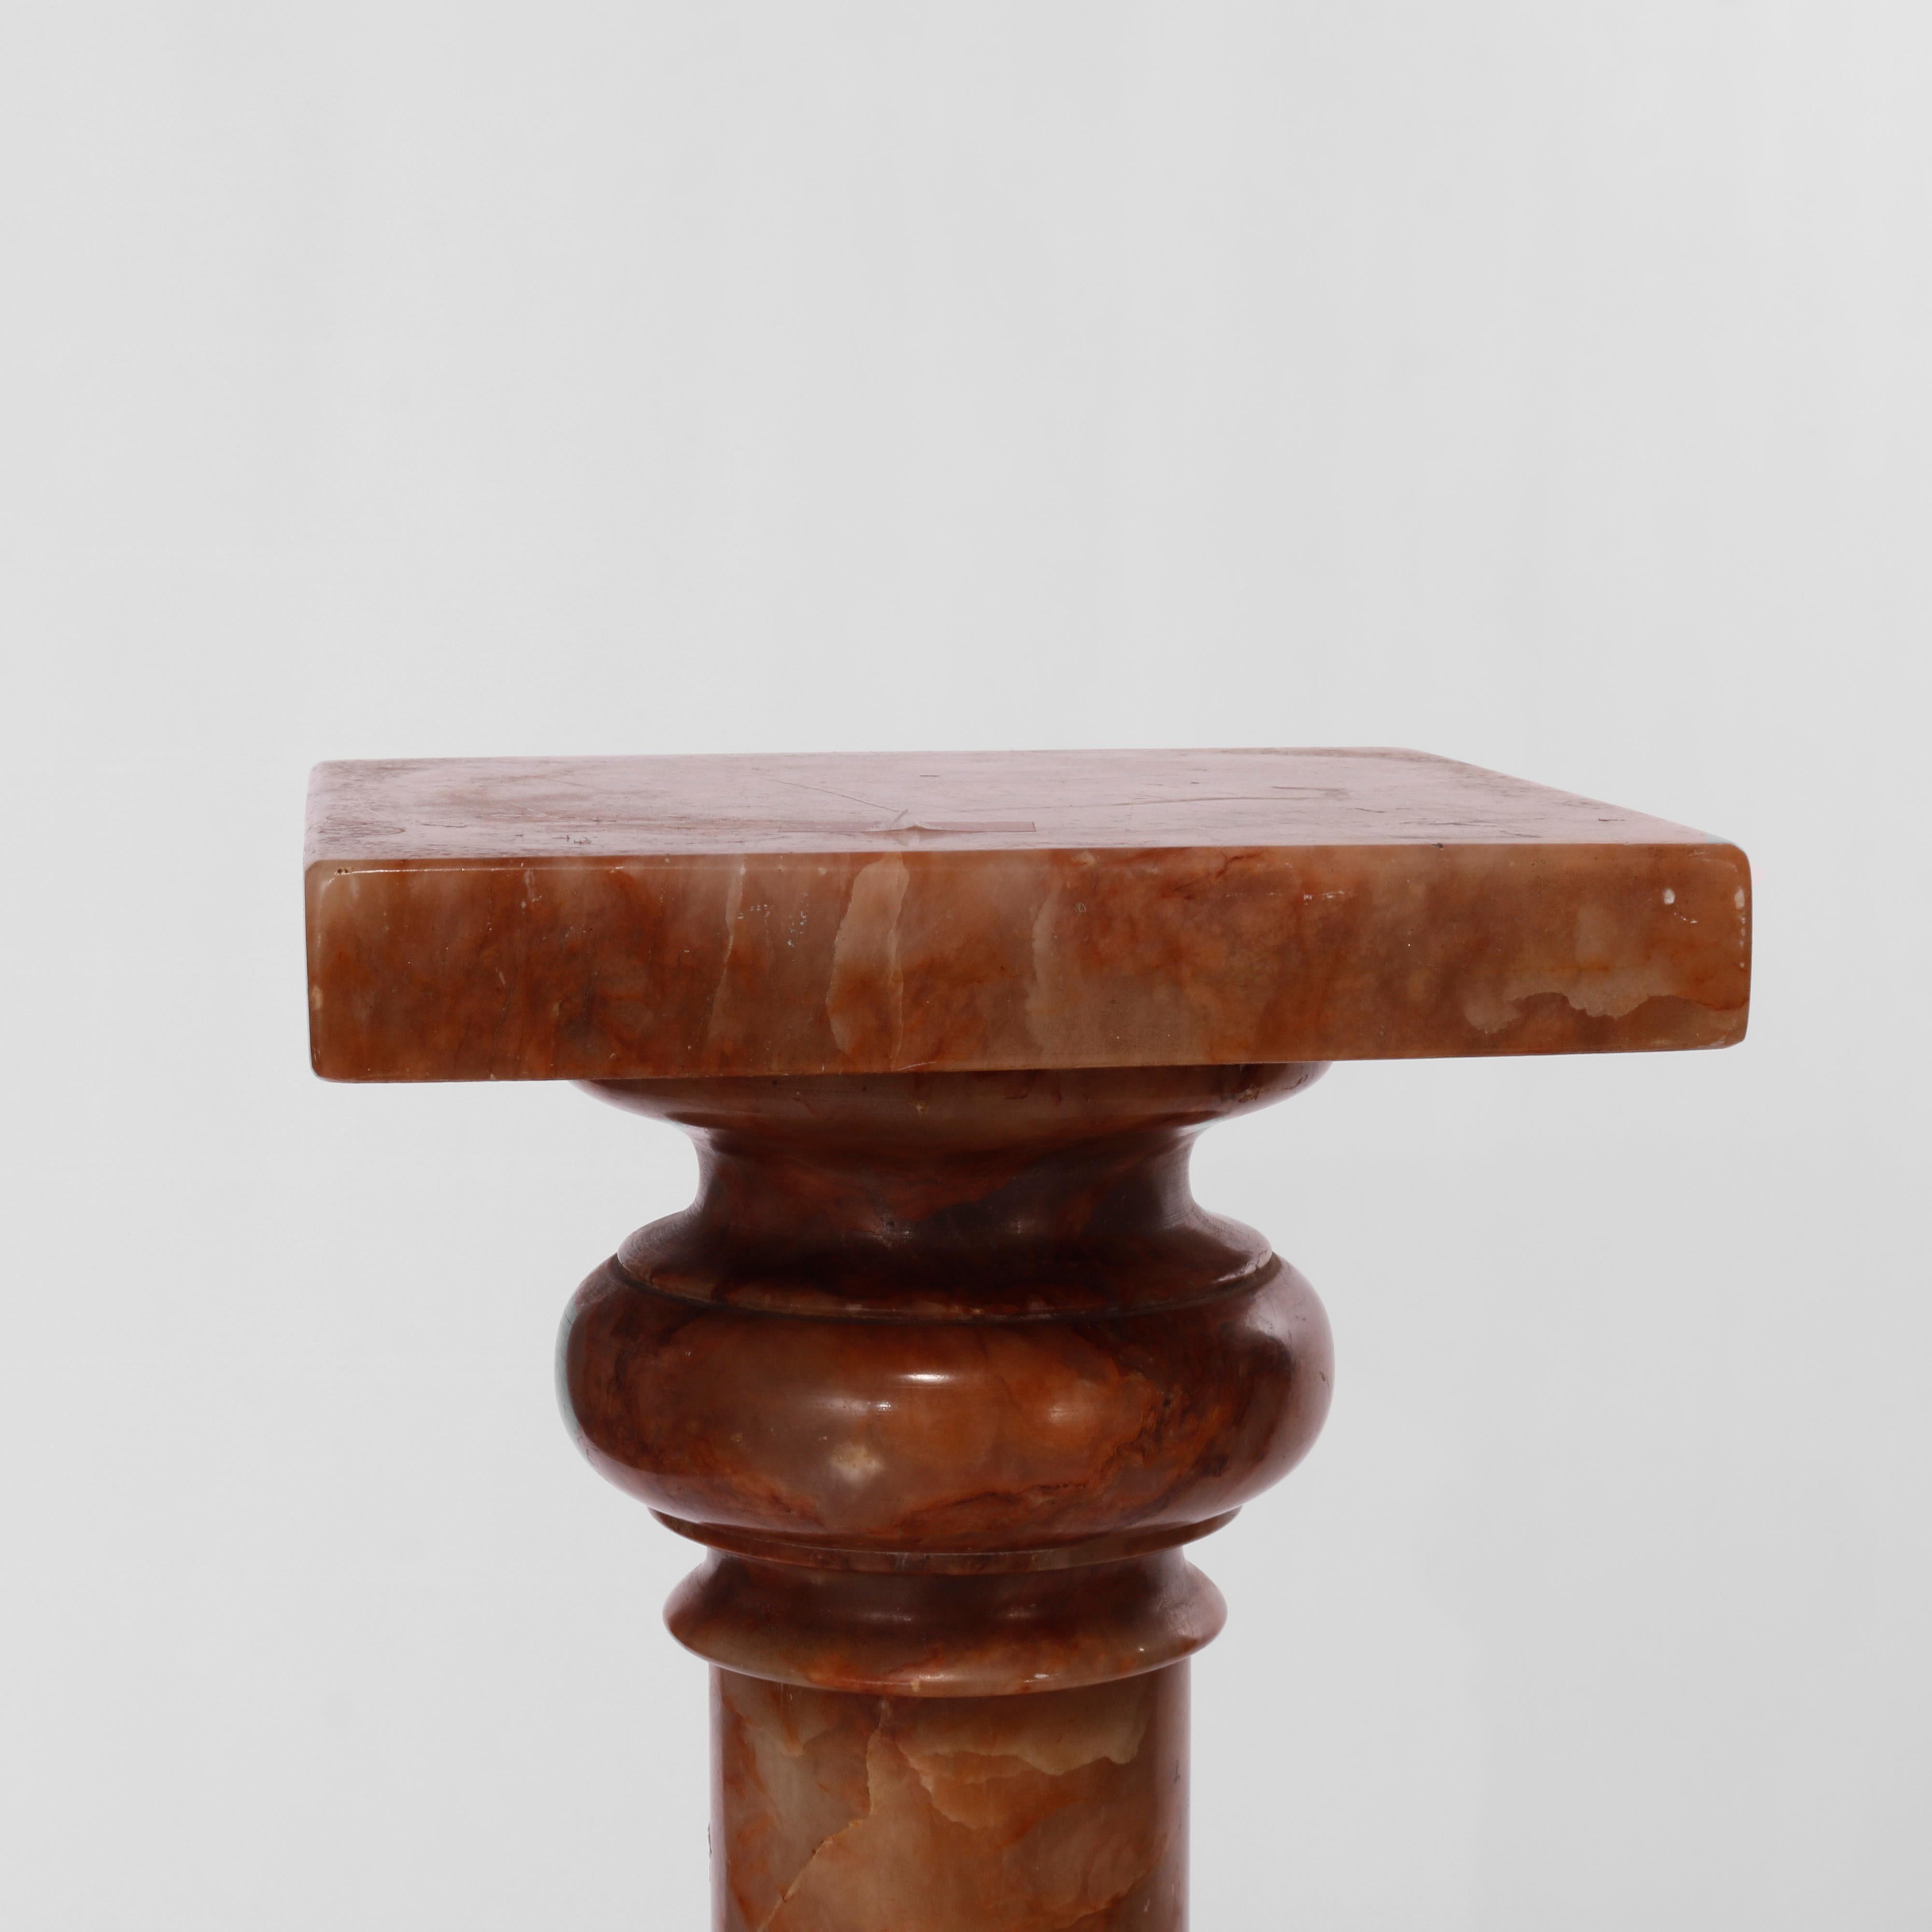 Antique Neoclassical Onyx Sculpture Display Pedestal 19th C For Sale 5